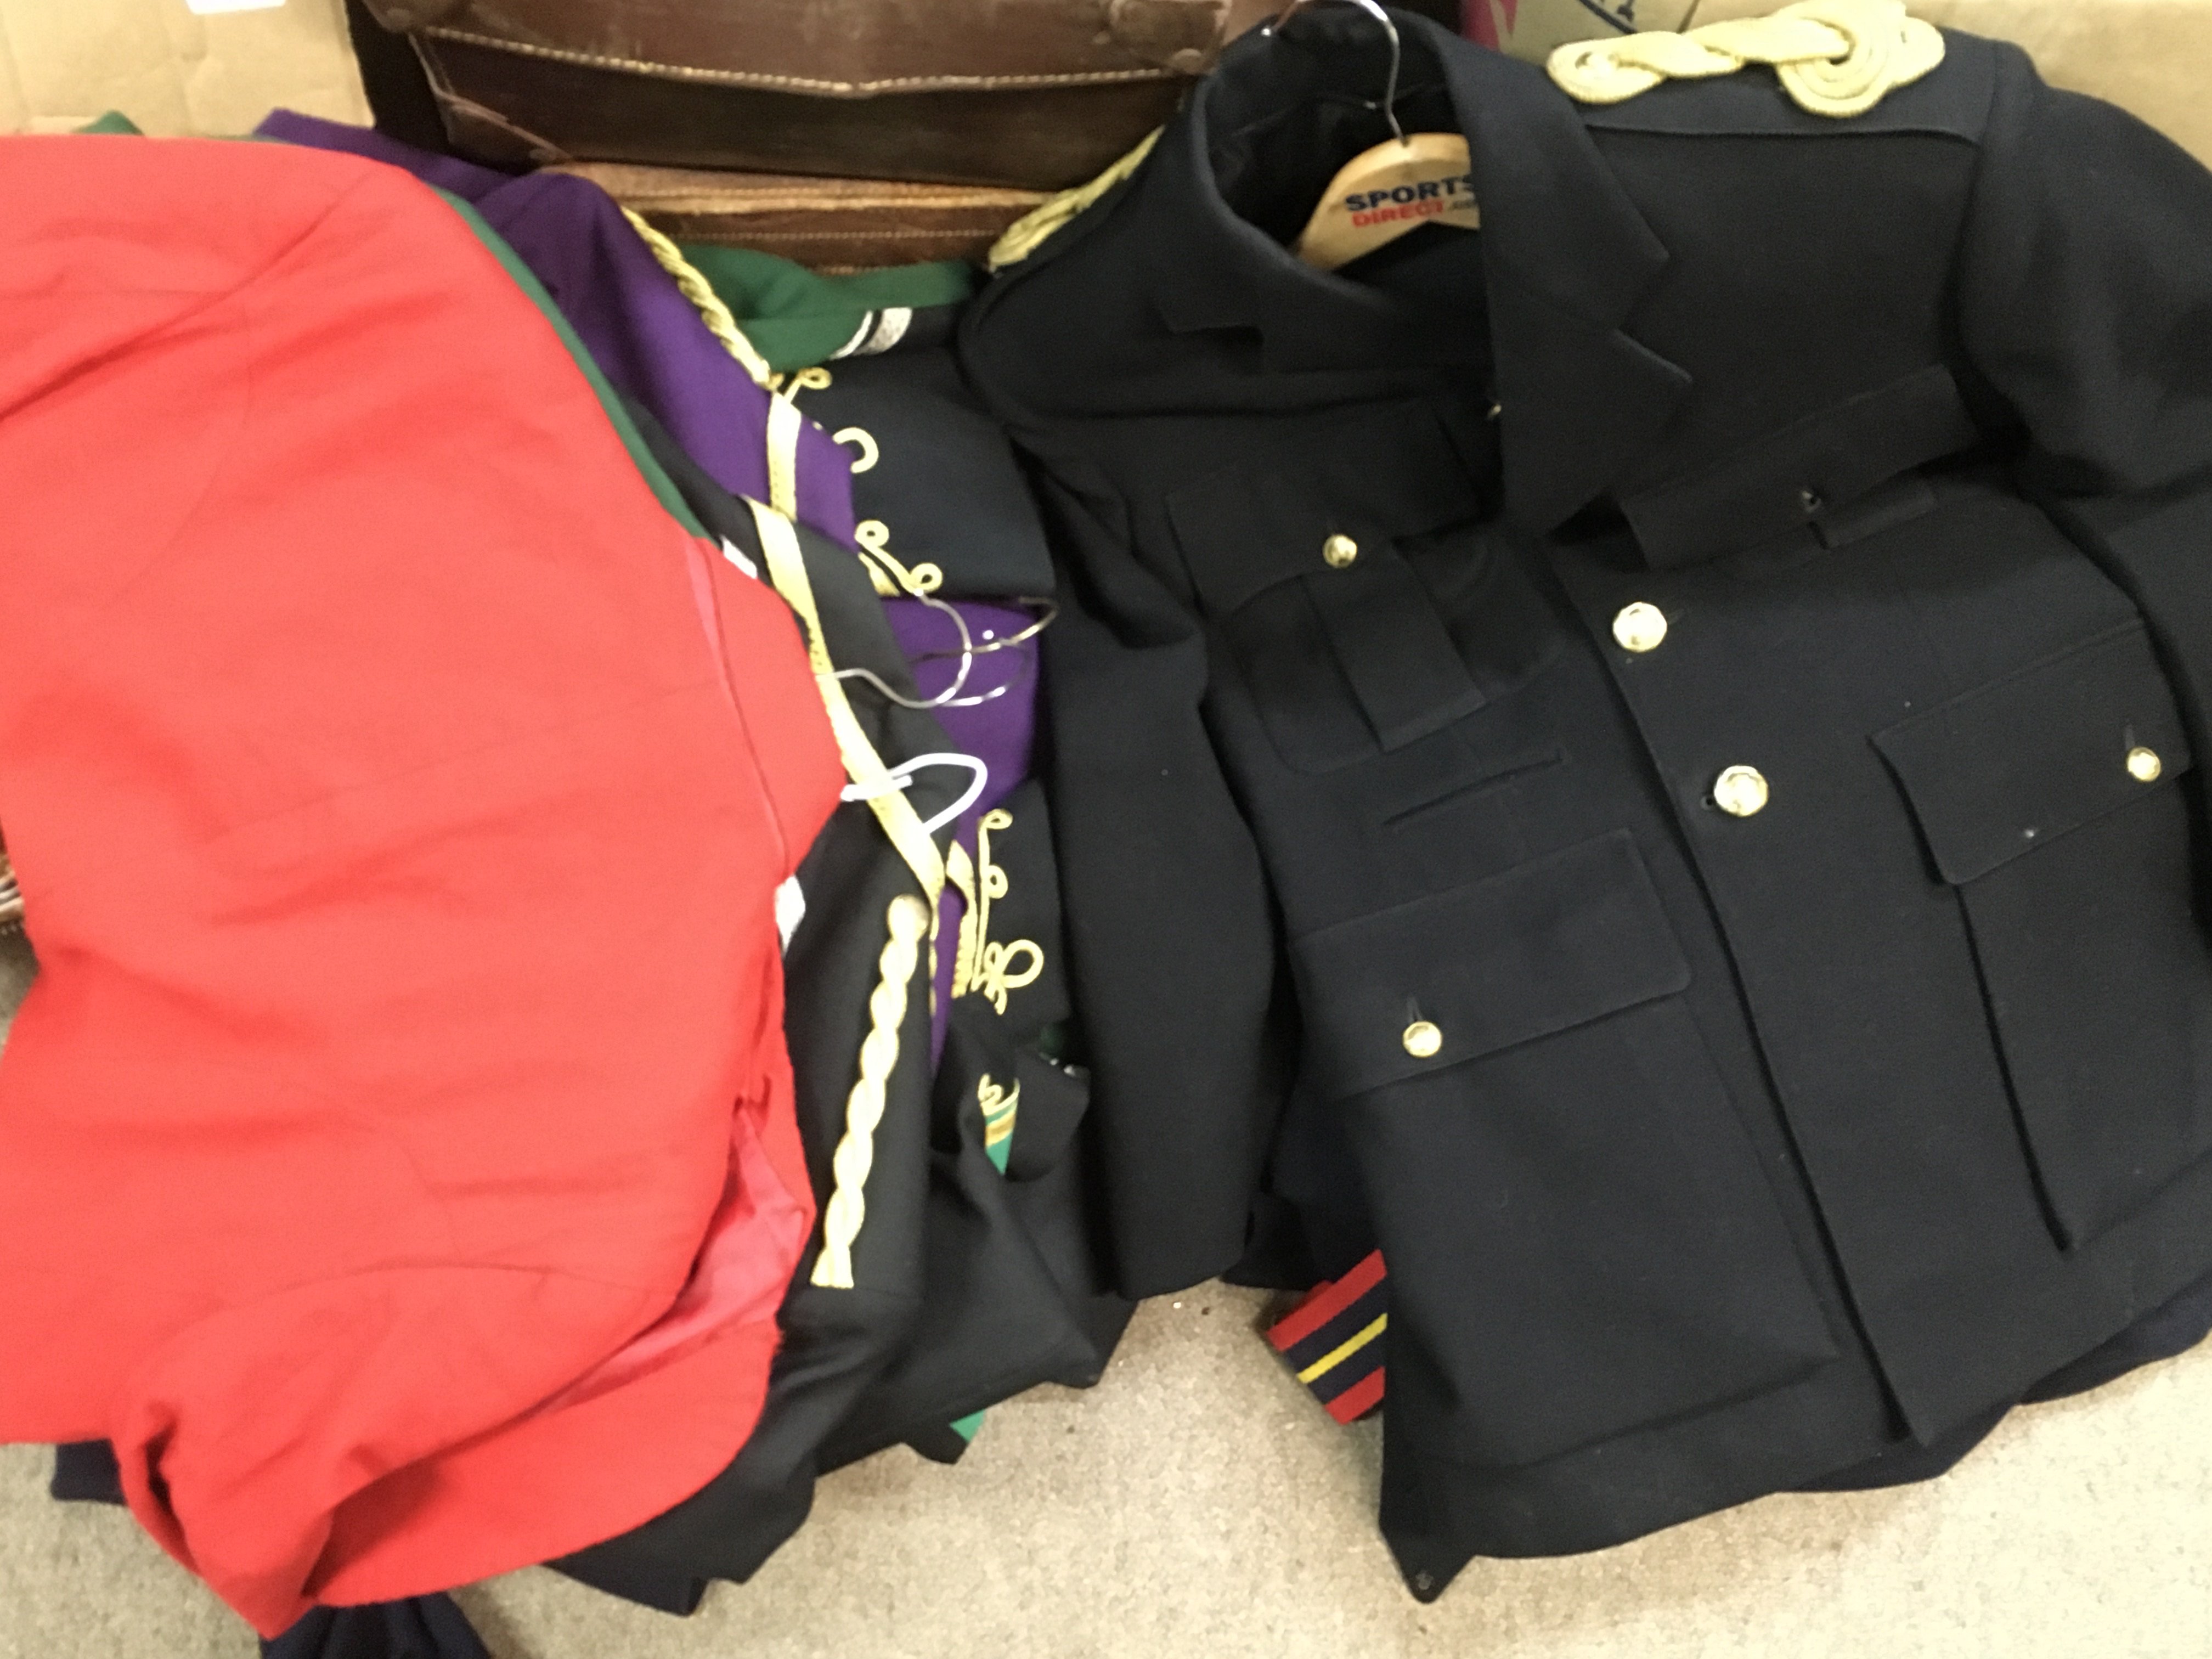 A collection of military uniforms including